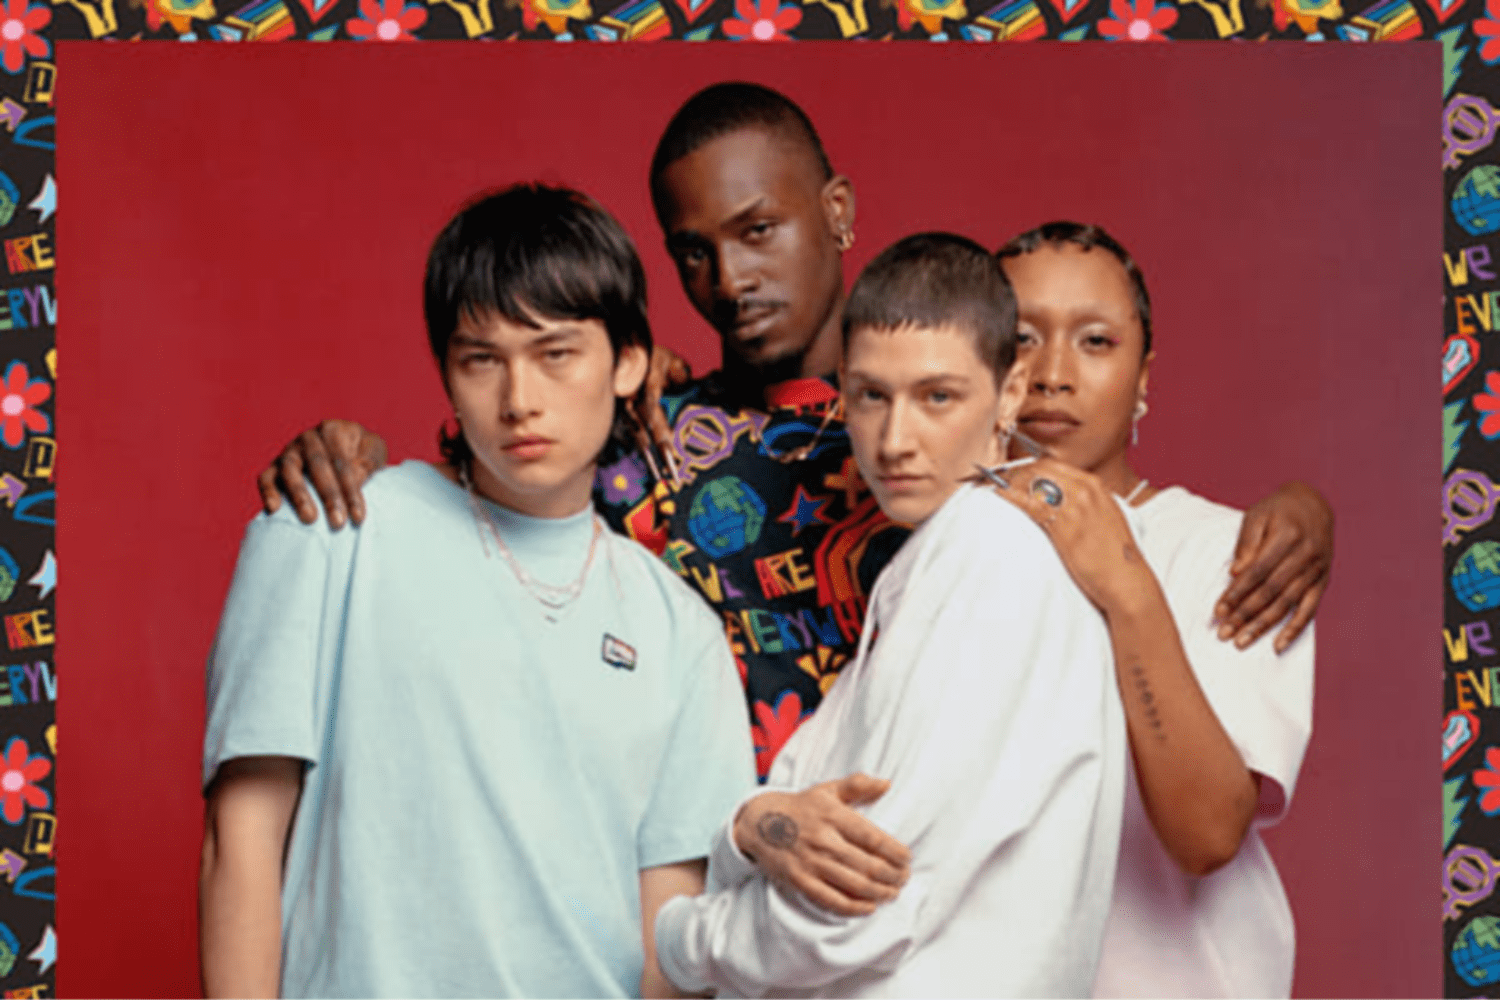 Discover some highlights of the PUMA PRIDE collection